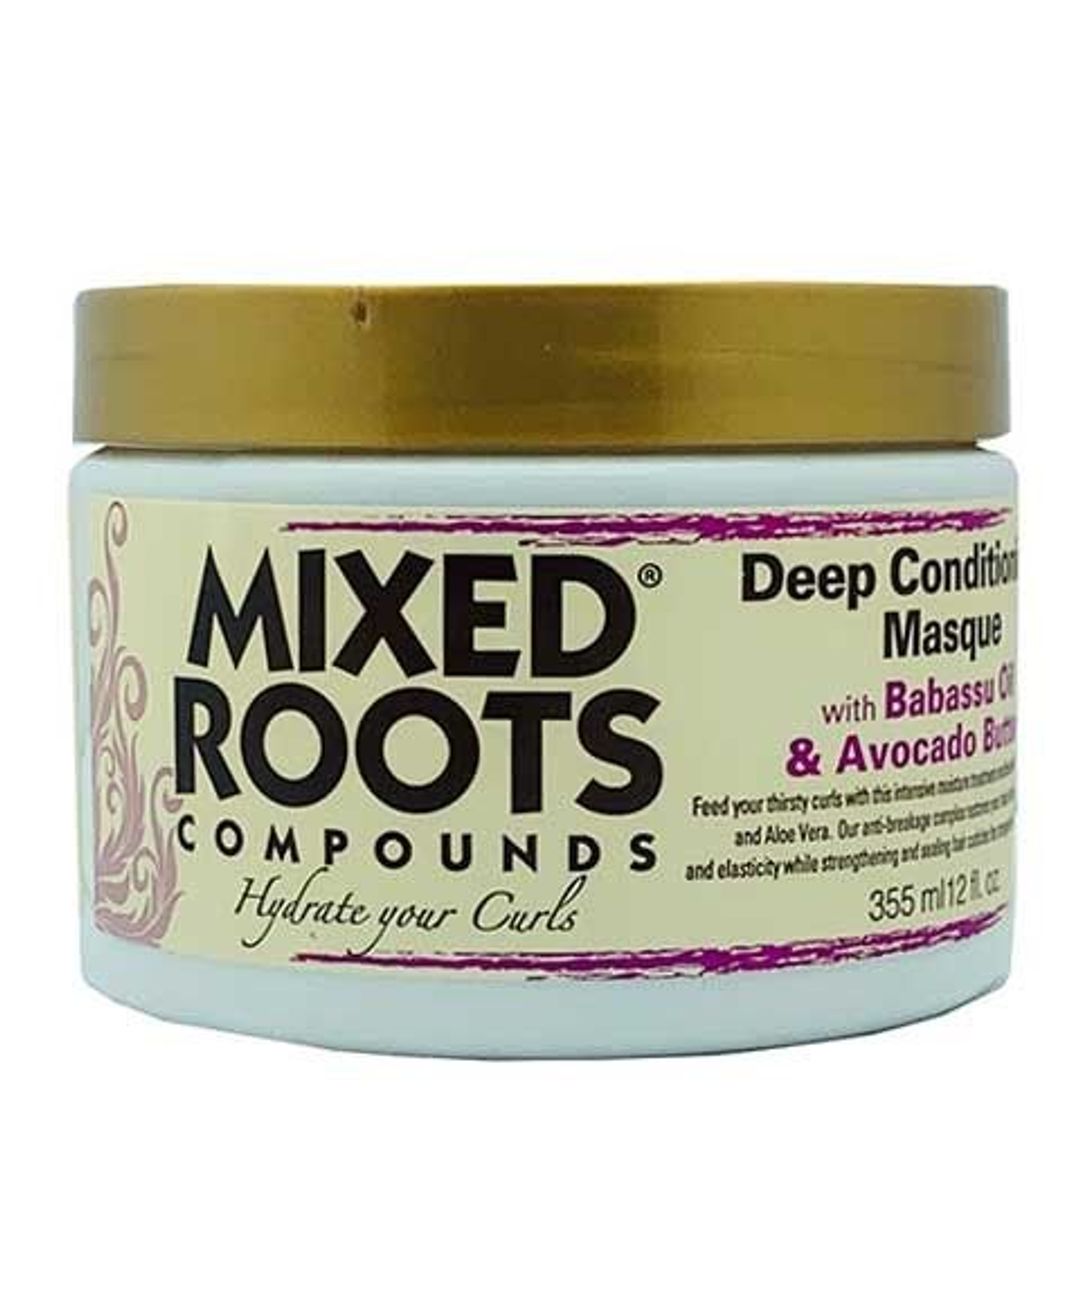 Mixed Roots - Compounds Deep Conditioning Masque With Babassu & Avocado 355ml